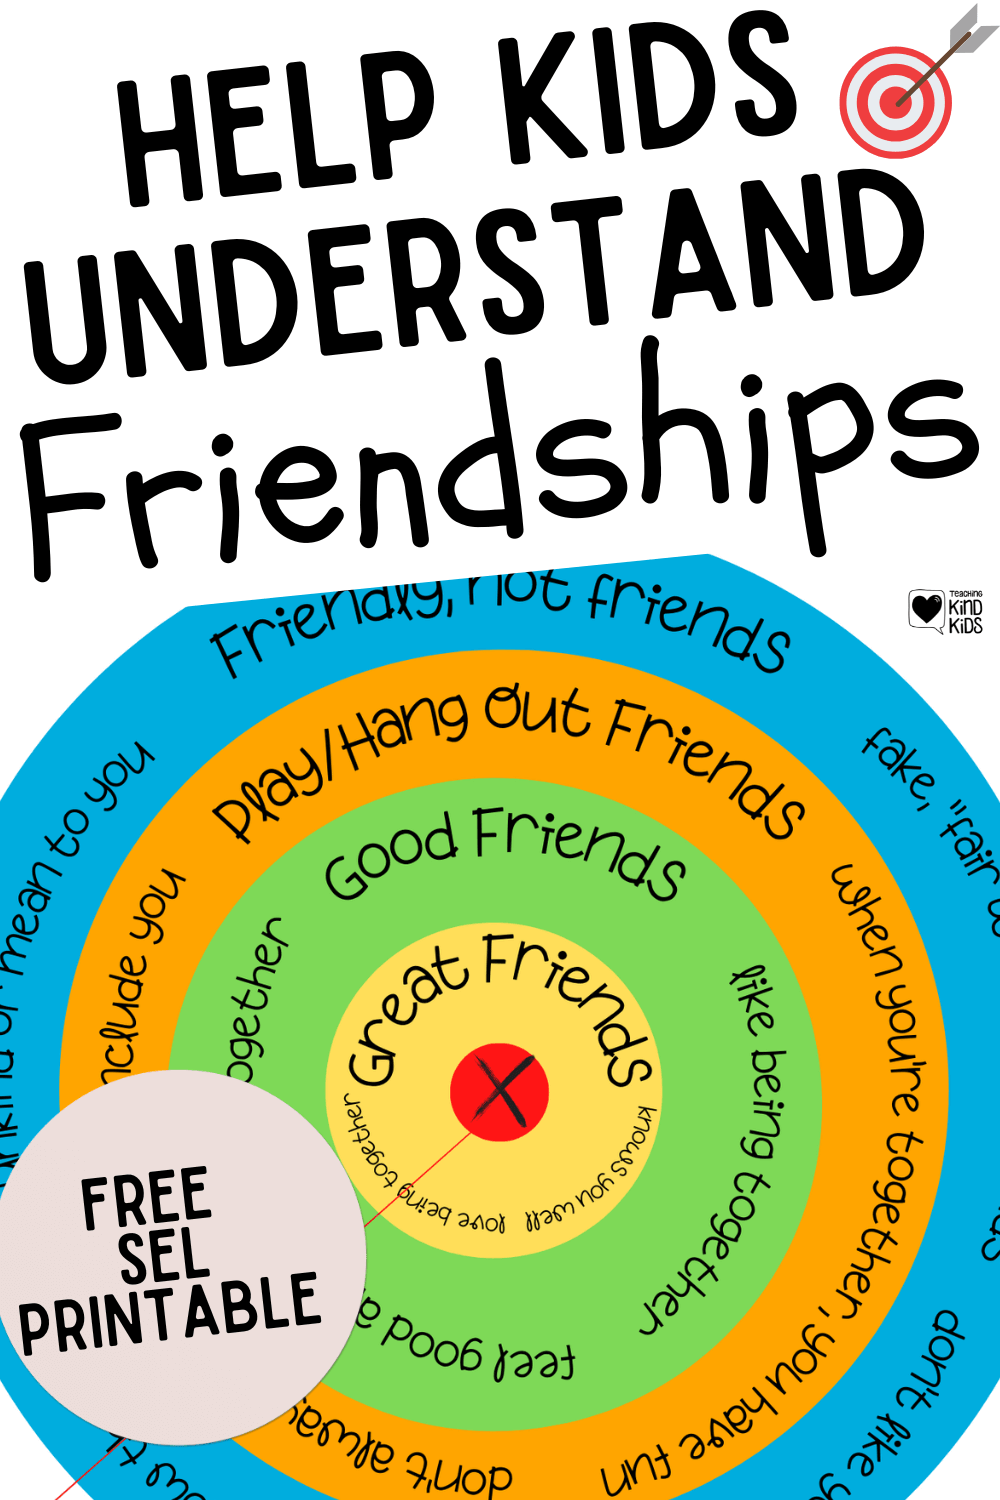 Use this Bullseye Friendship printable to help explain different kinds of friends and different kinds of friendships to kids so they set clear, healthy boundaries.